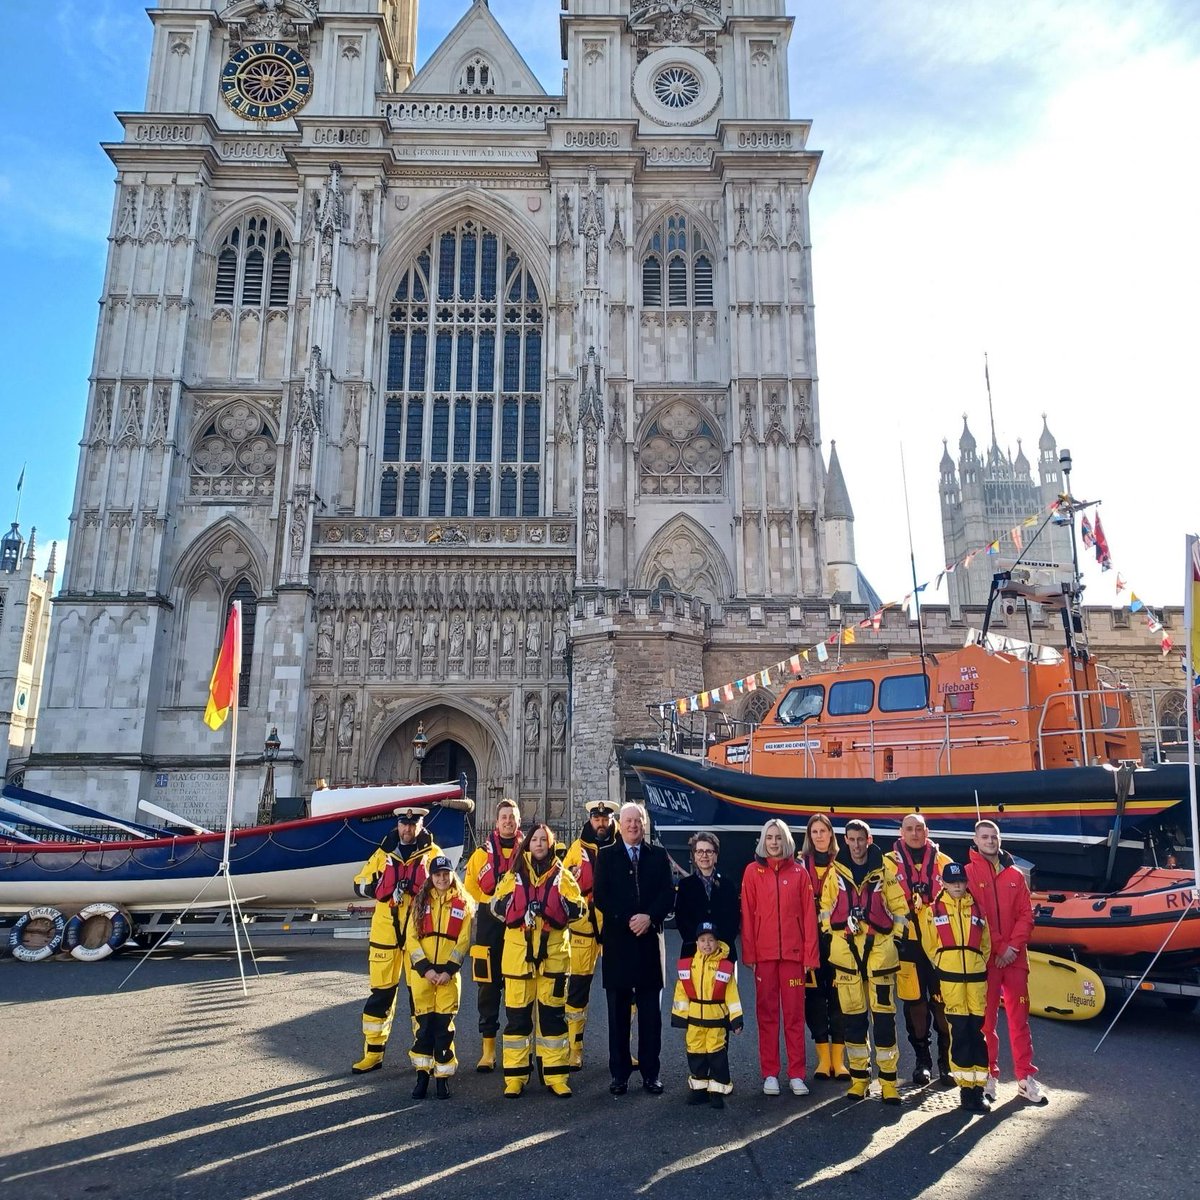 Today, we’re at Westminster Abbey for a very special service to mark our official 200th anniversary 💙 You’re invited to watch the Westminster Thanksgiving Service from 11.30am on a livestream provided by @wabbey - rnli.social/3Ildhii